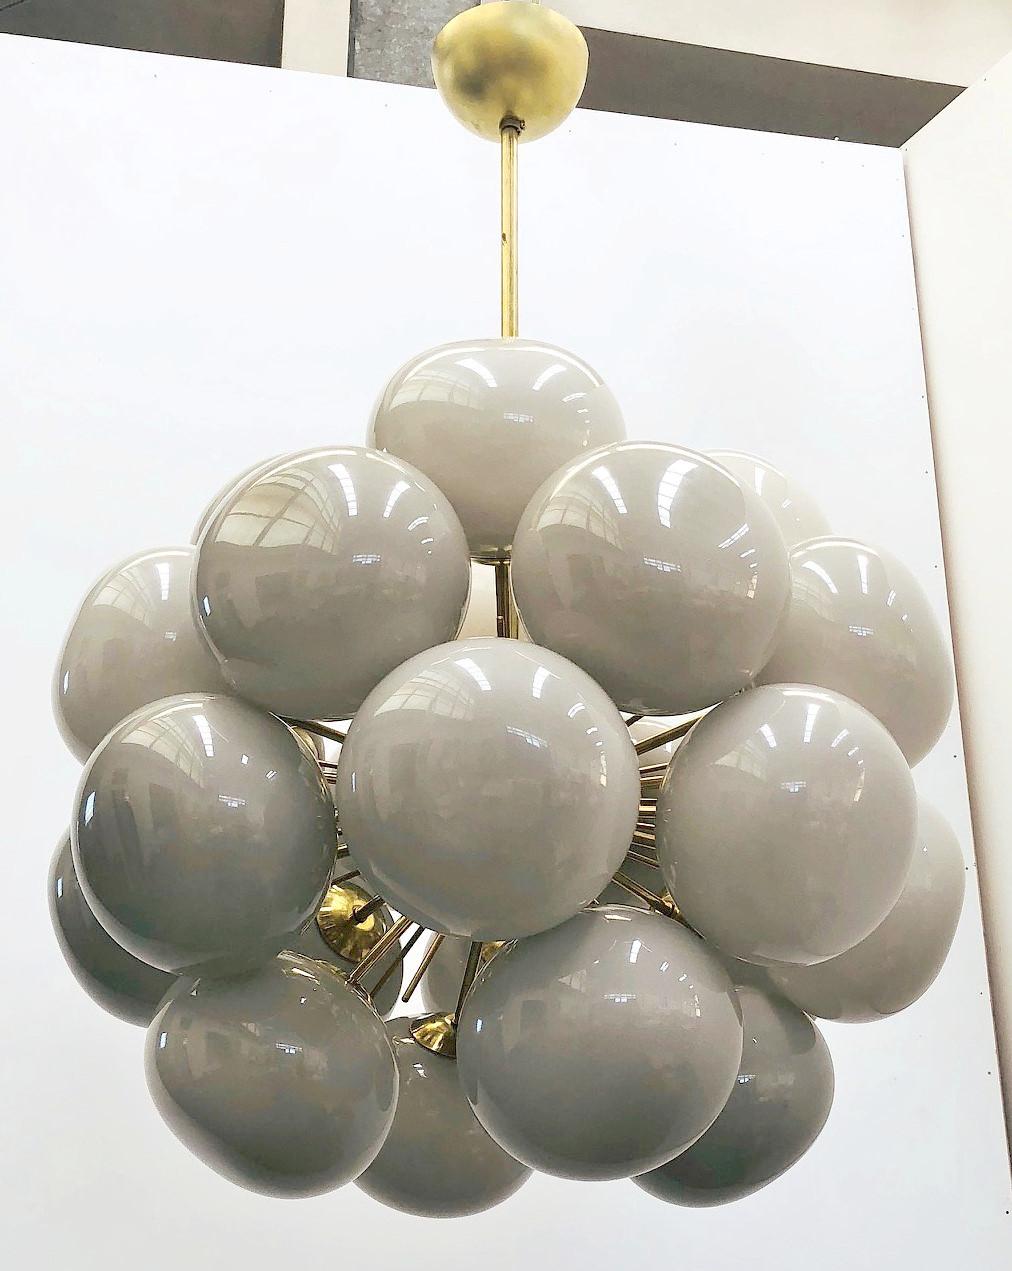 Italian sputnik chandelier with 24 cream Murano pebble glass shades mounted on brass frame / Designed by Fabio Bergomi for Fabio Ltd / Made in Italy
24 lights / E12 or E14 type / max 40W each
Diameter: 28 inches / Height: 39 inches including rod and